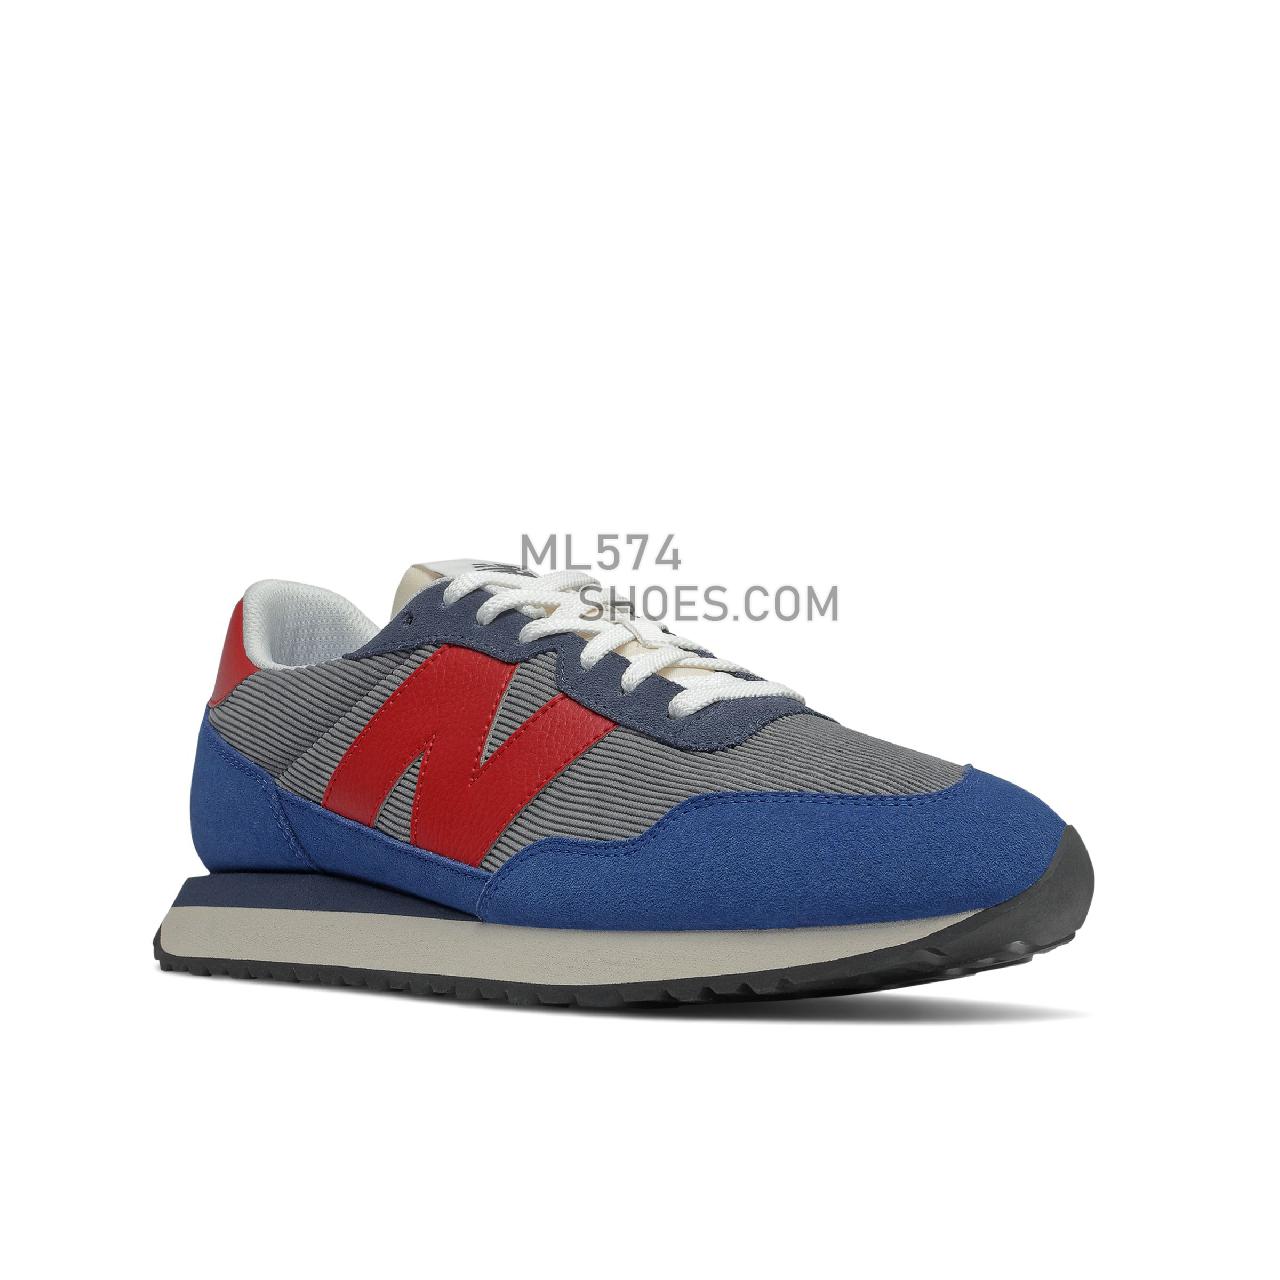 New Balance 237 - Men's Sport Style Sneakers - Nb Navy with Team Red - MS237LE1